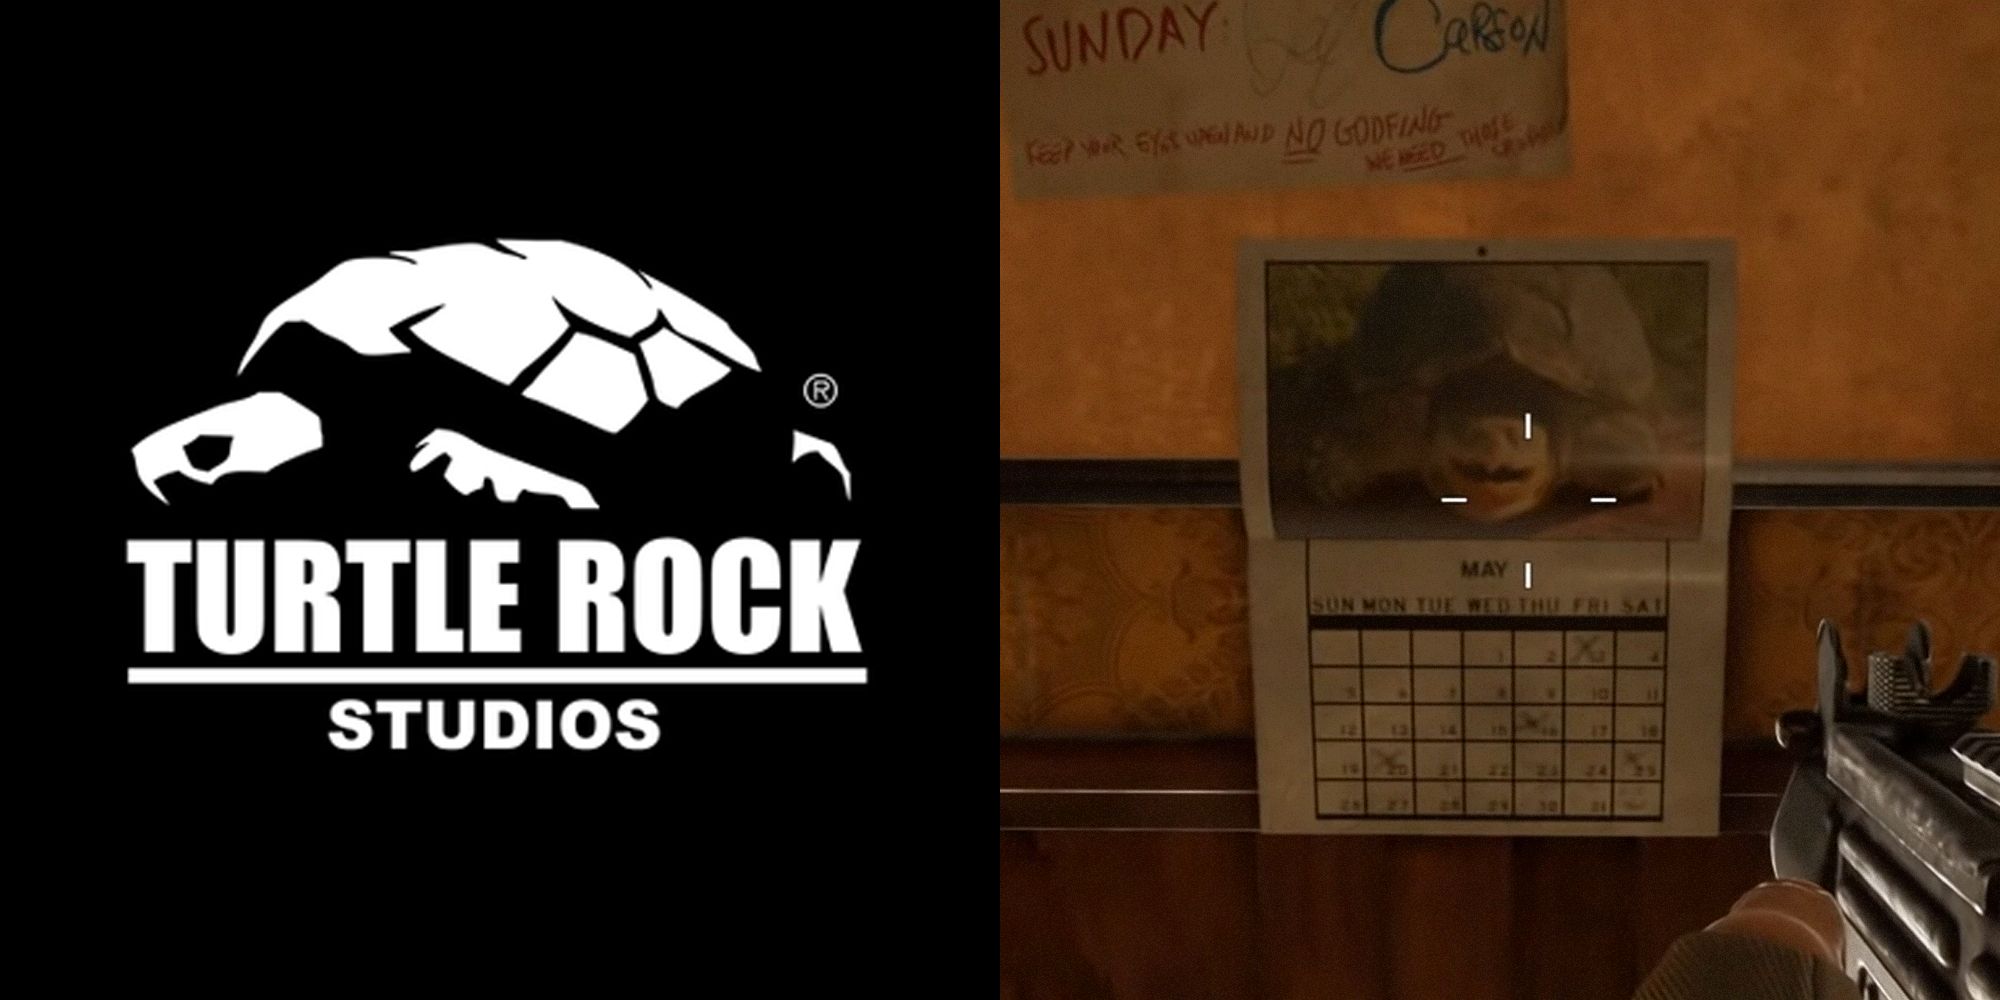 Split image with two photos. The left is the logo for developer Turtle Rock Studios. The right is a screenshot from Back 4 Blood of a turtle on a calendar.